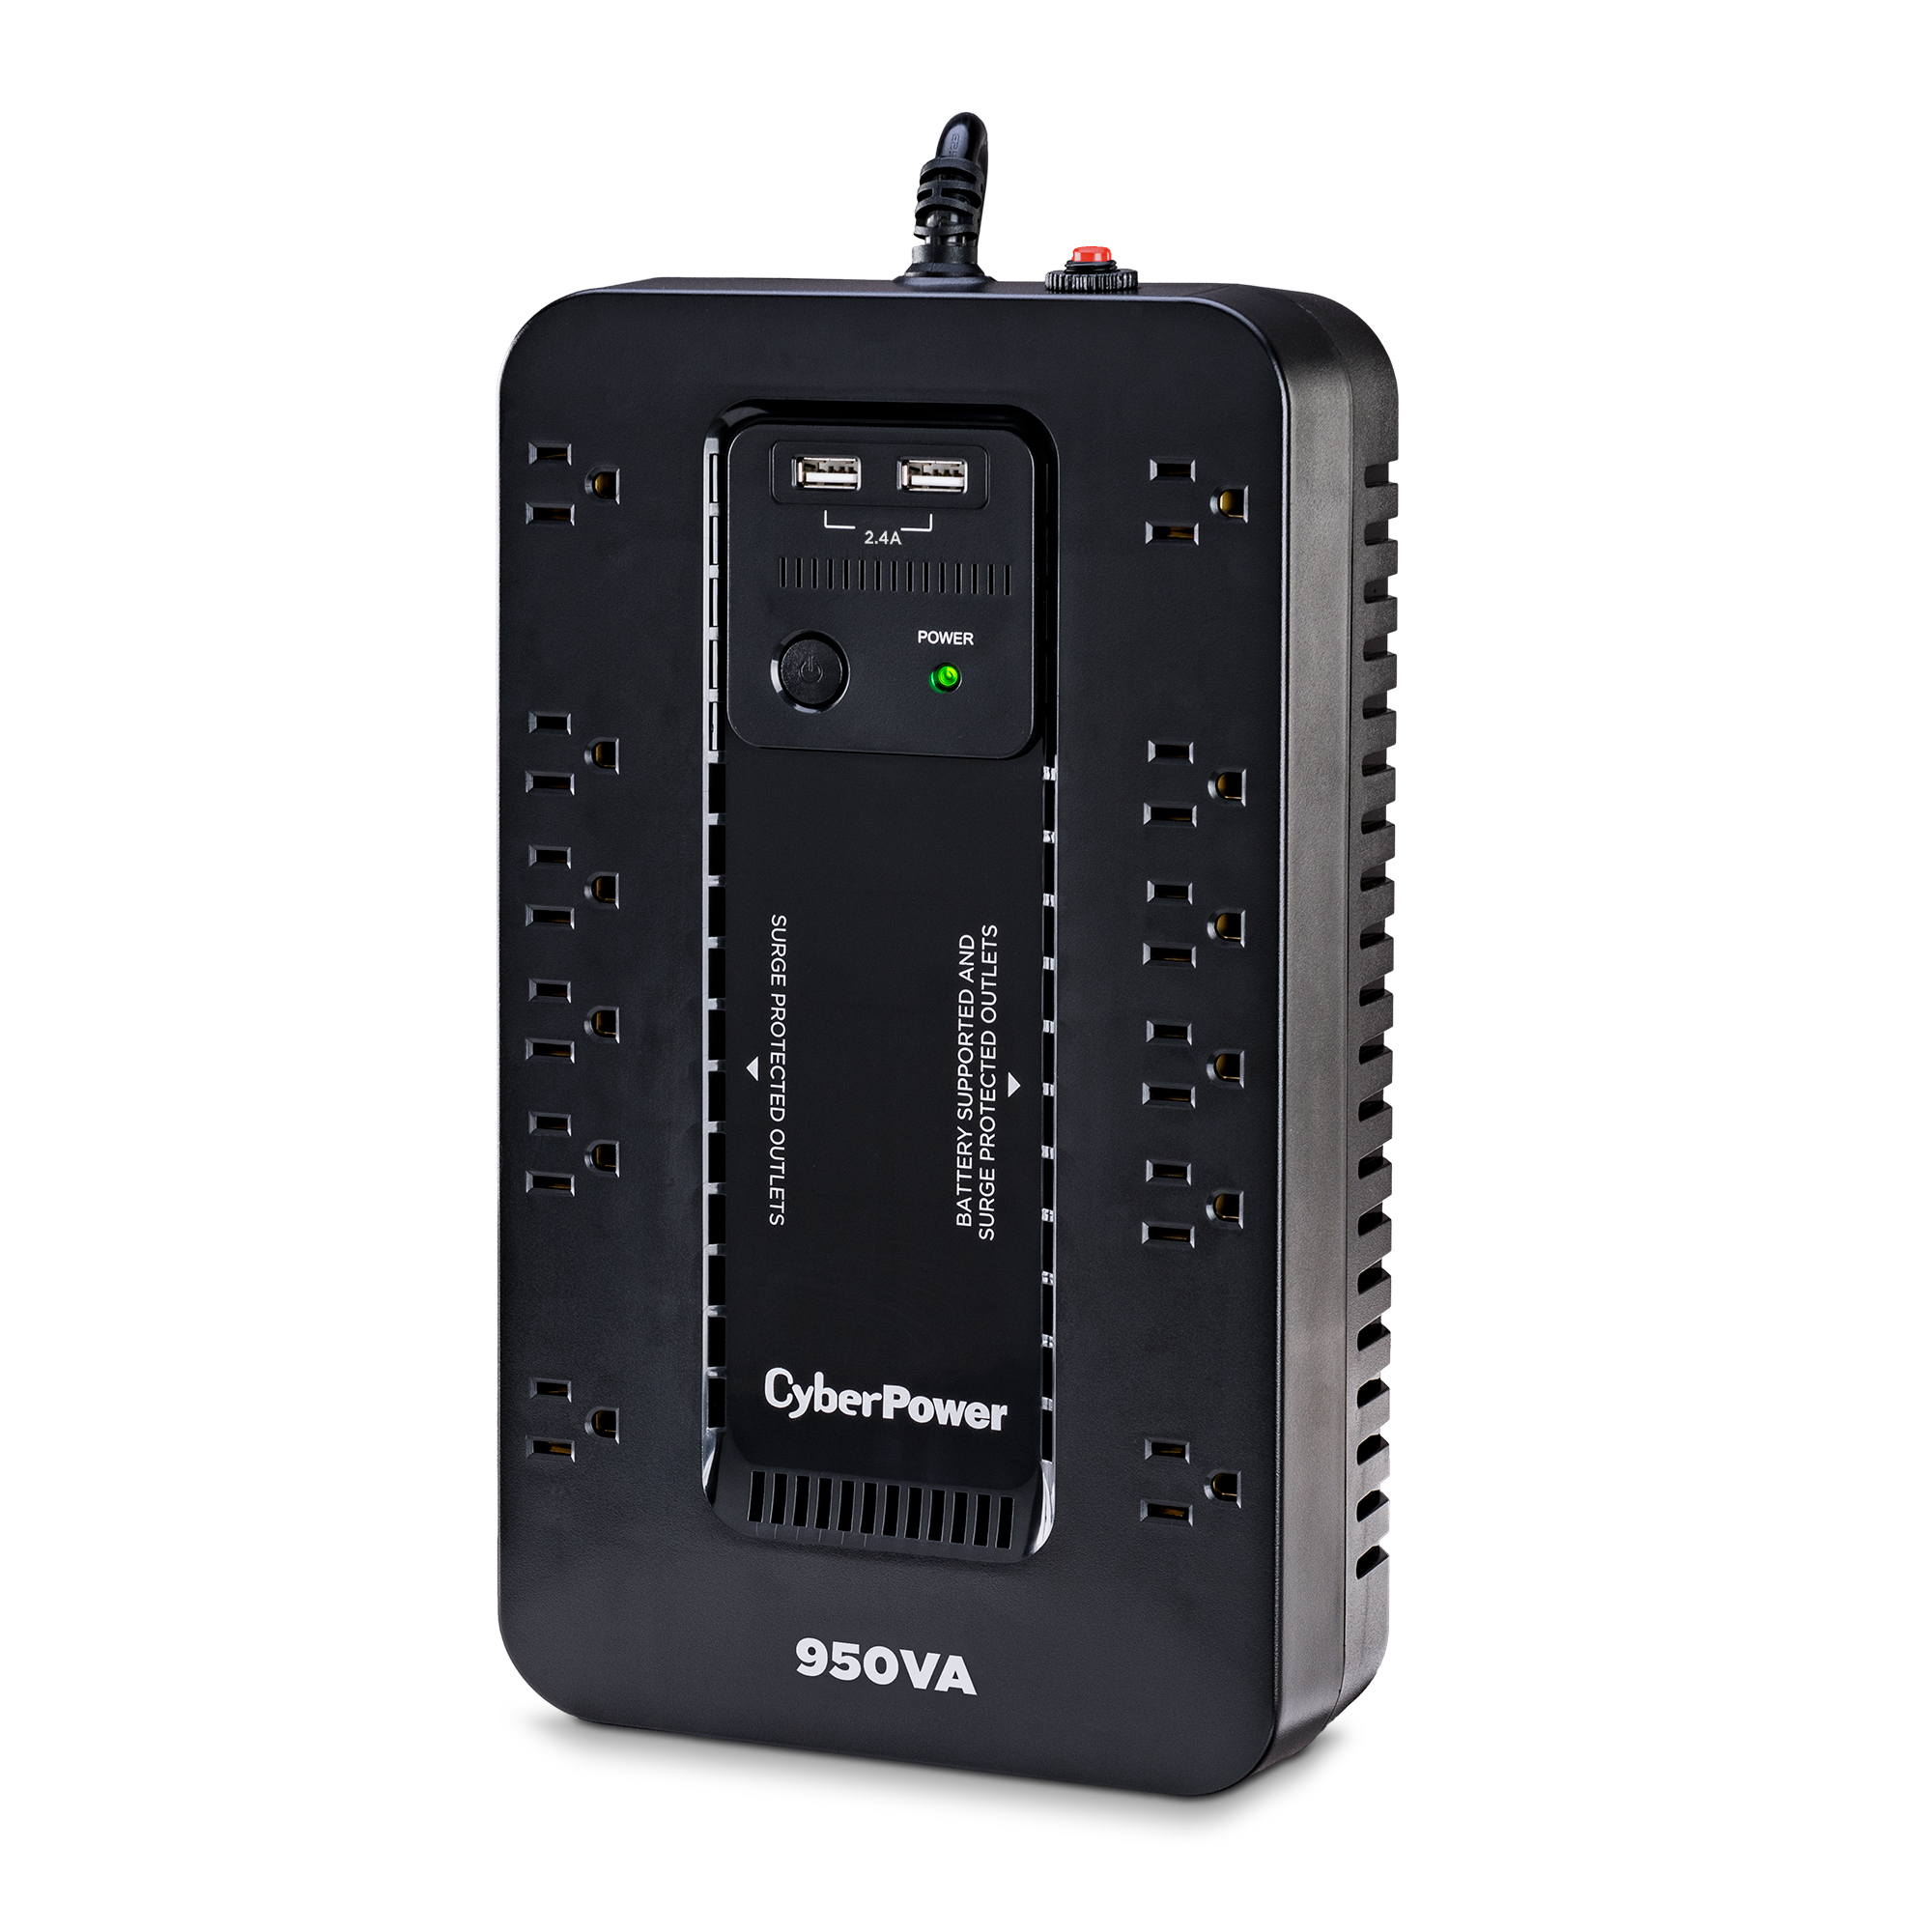 SX950U Battery Backup Product Details, Specs, Downloads CyberPower